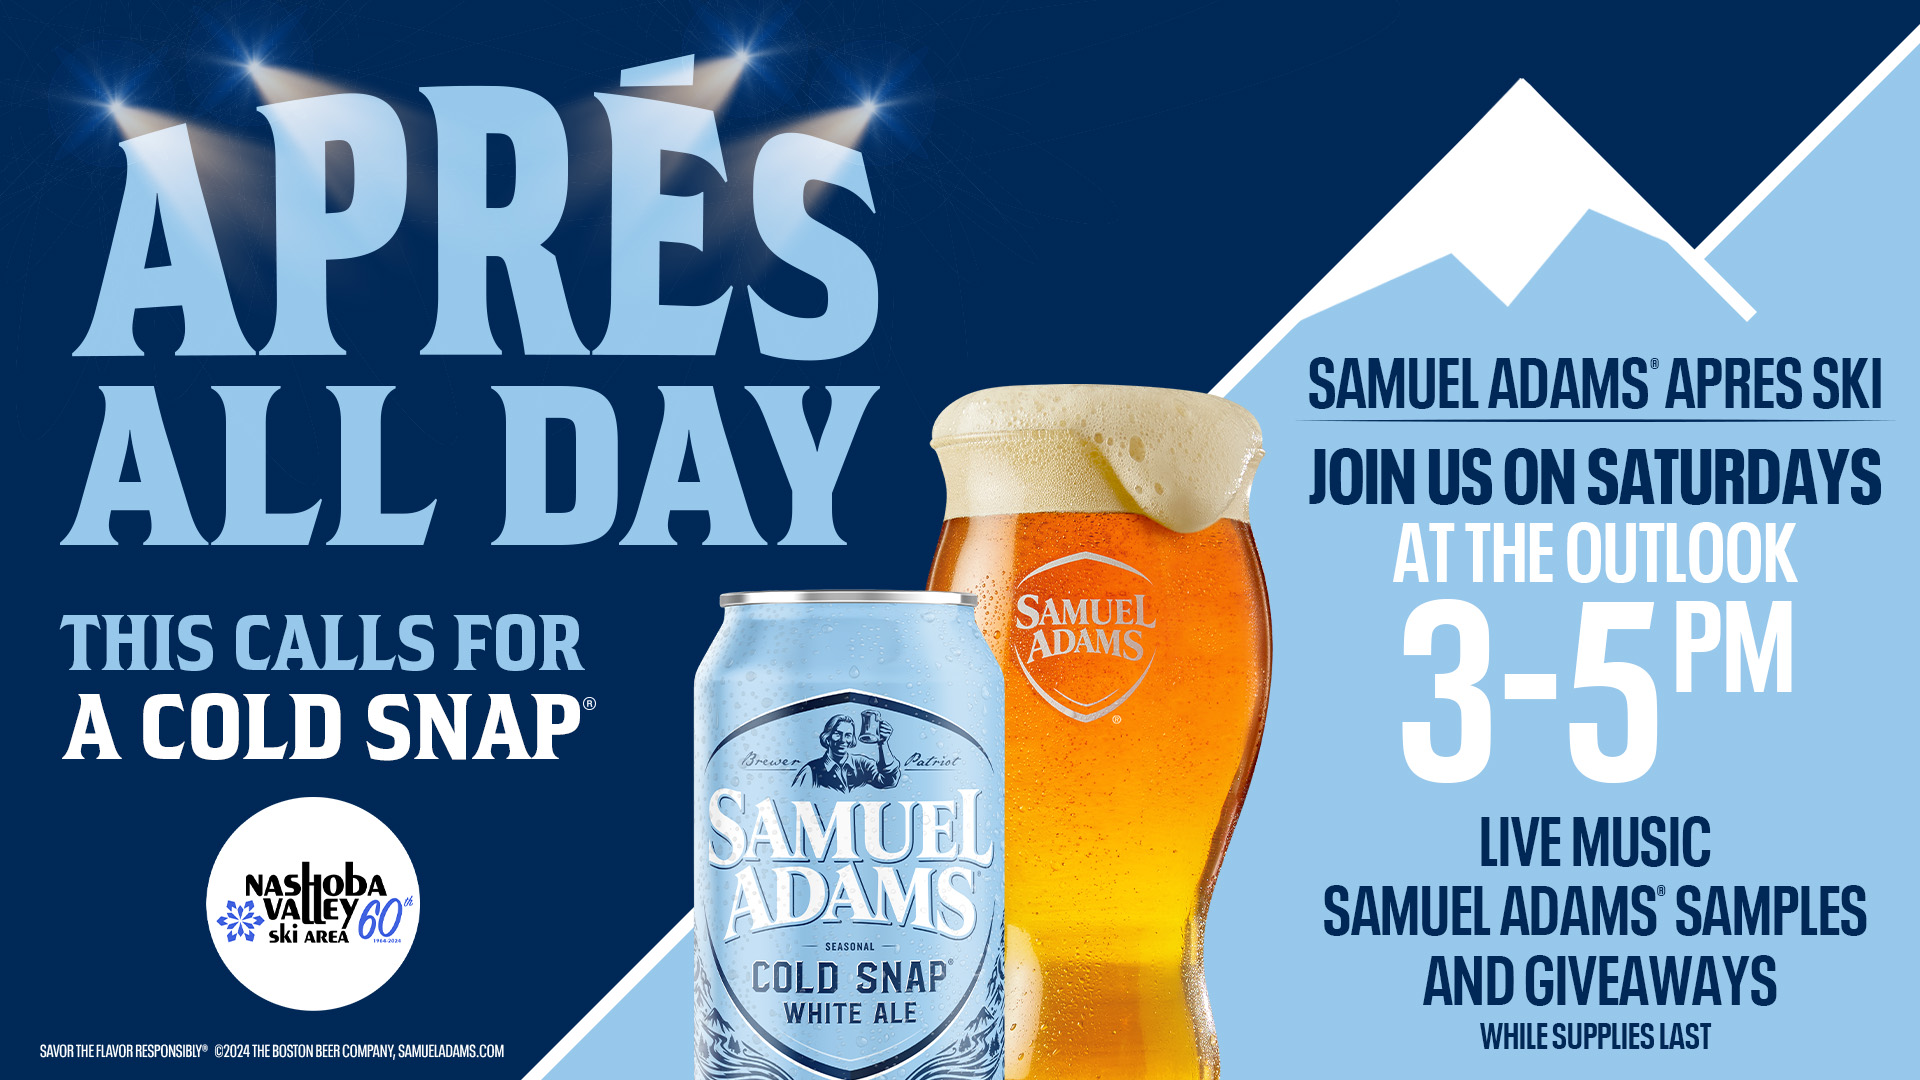 Apres all day, Samuel Adams Apres Ski. Join us on Saturdays. At the Outlook. 3-5pm. Live Music. Samuel Adams samples and giveaways.